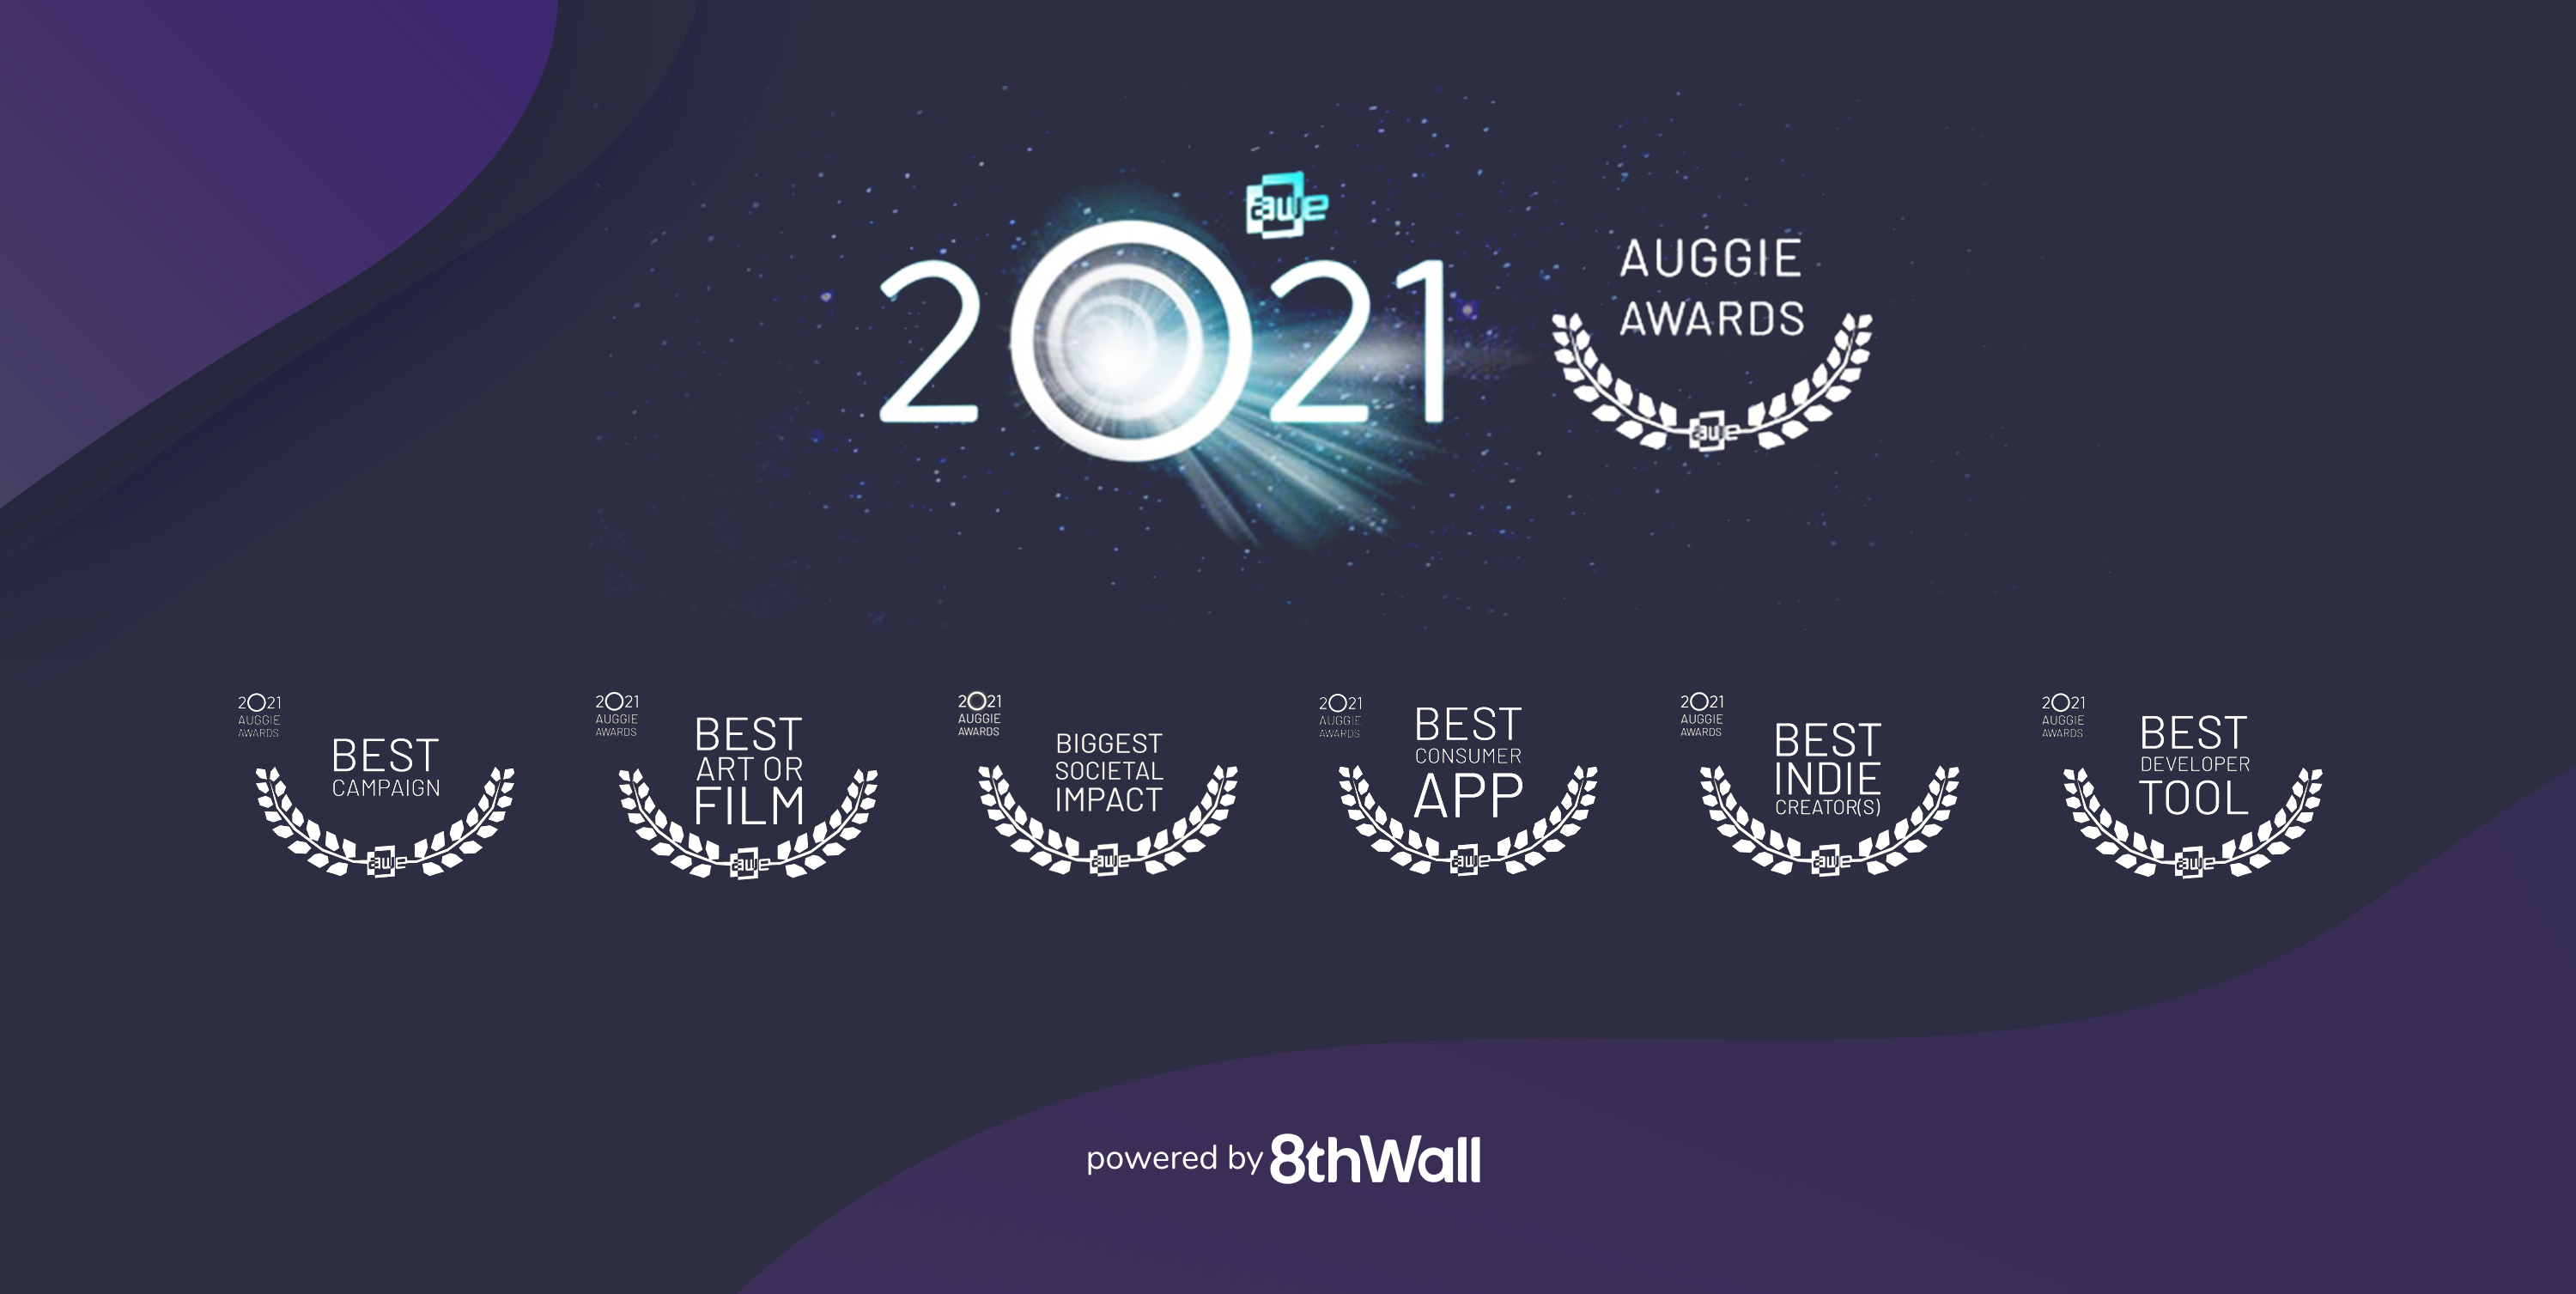 8th Wall powered WebAR experiences nominated for 23 Auggie Awards across 6 categories